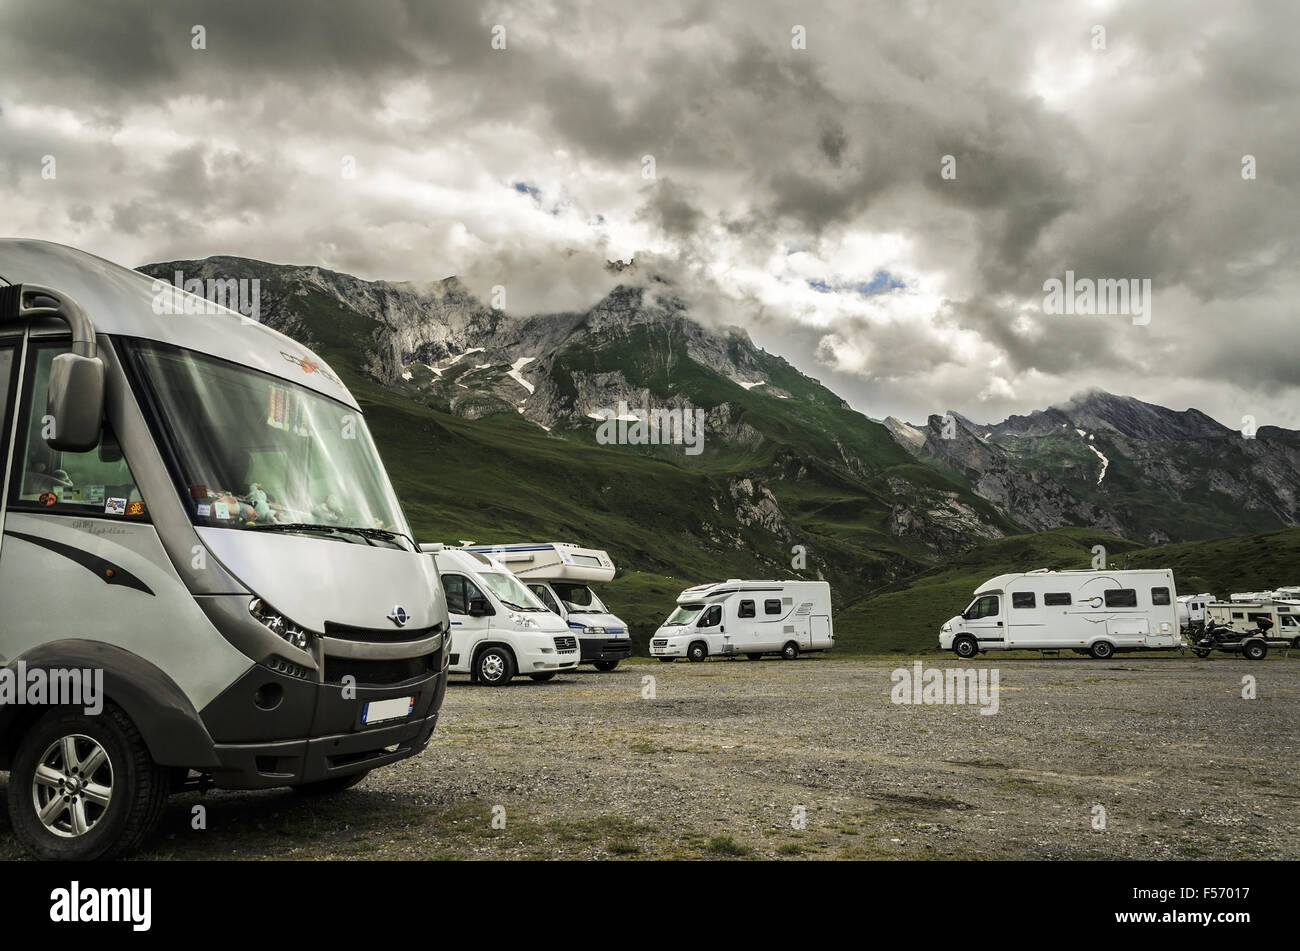 On the road in the Pyrenees mountains in Spain Stock Photo